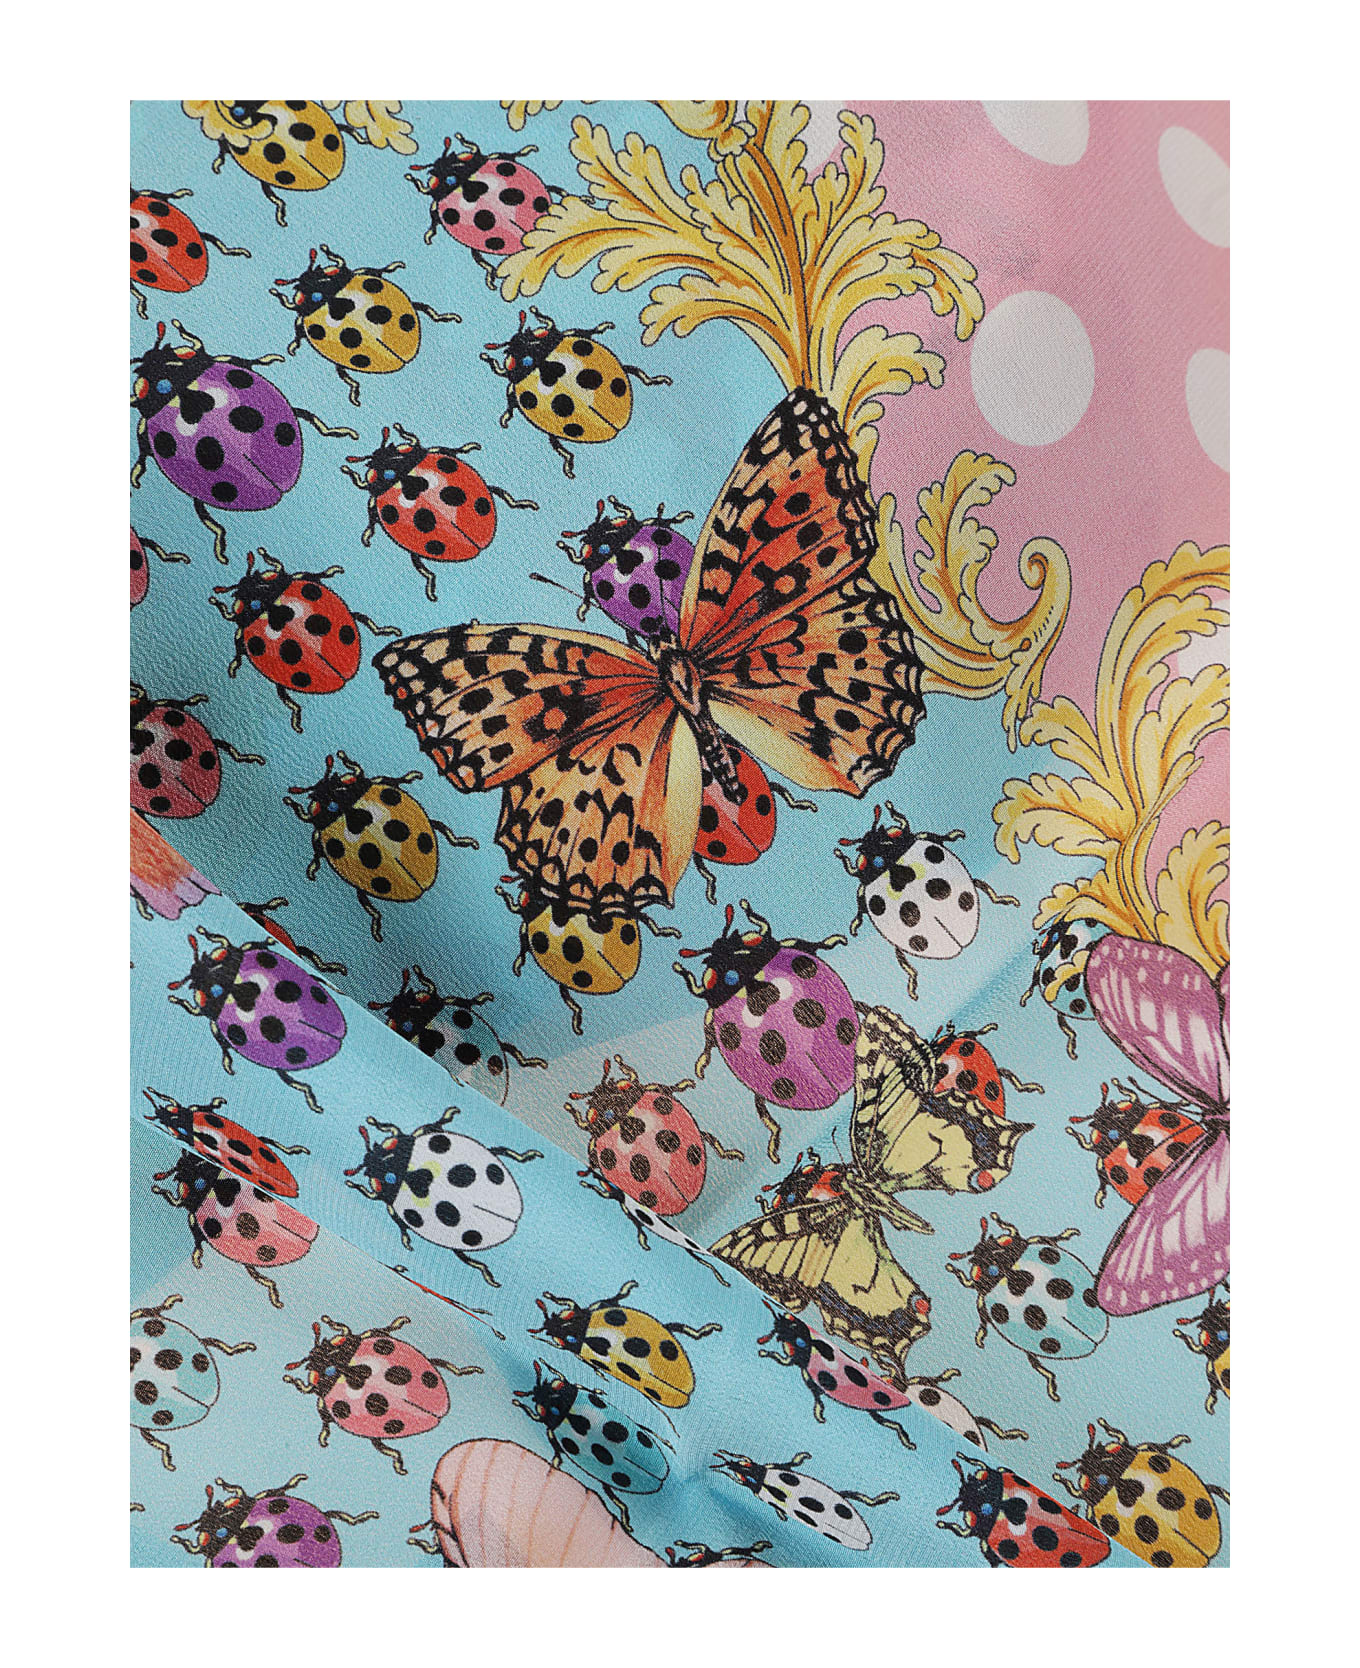 Versace Polka Dot Lady Bug & Butterfly Printed Scarf - Multicolor